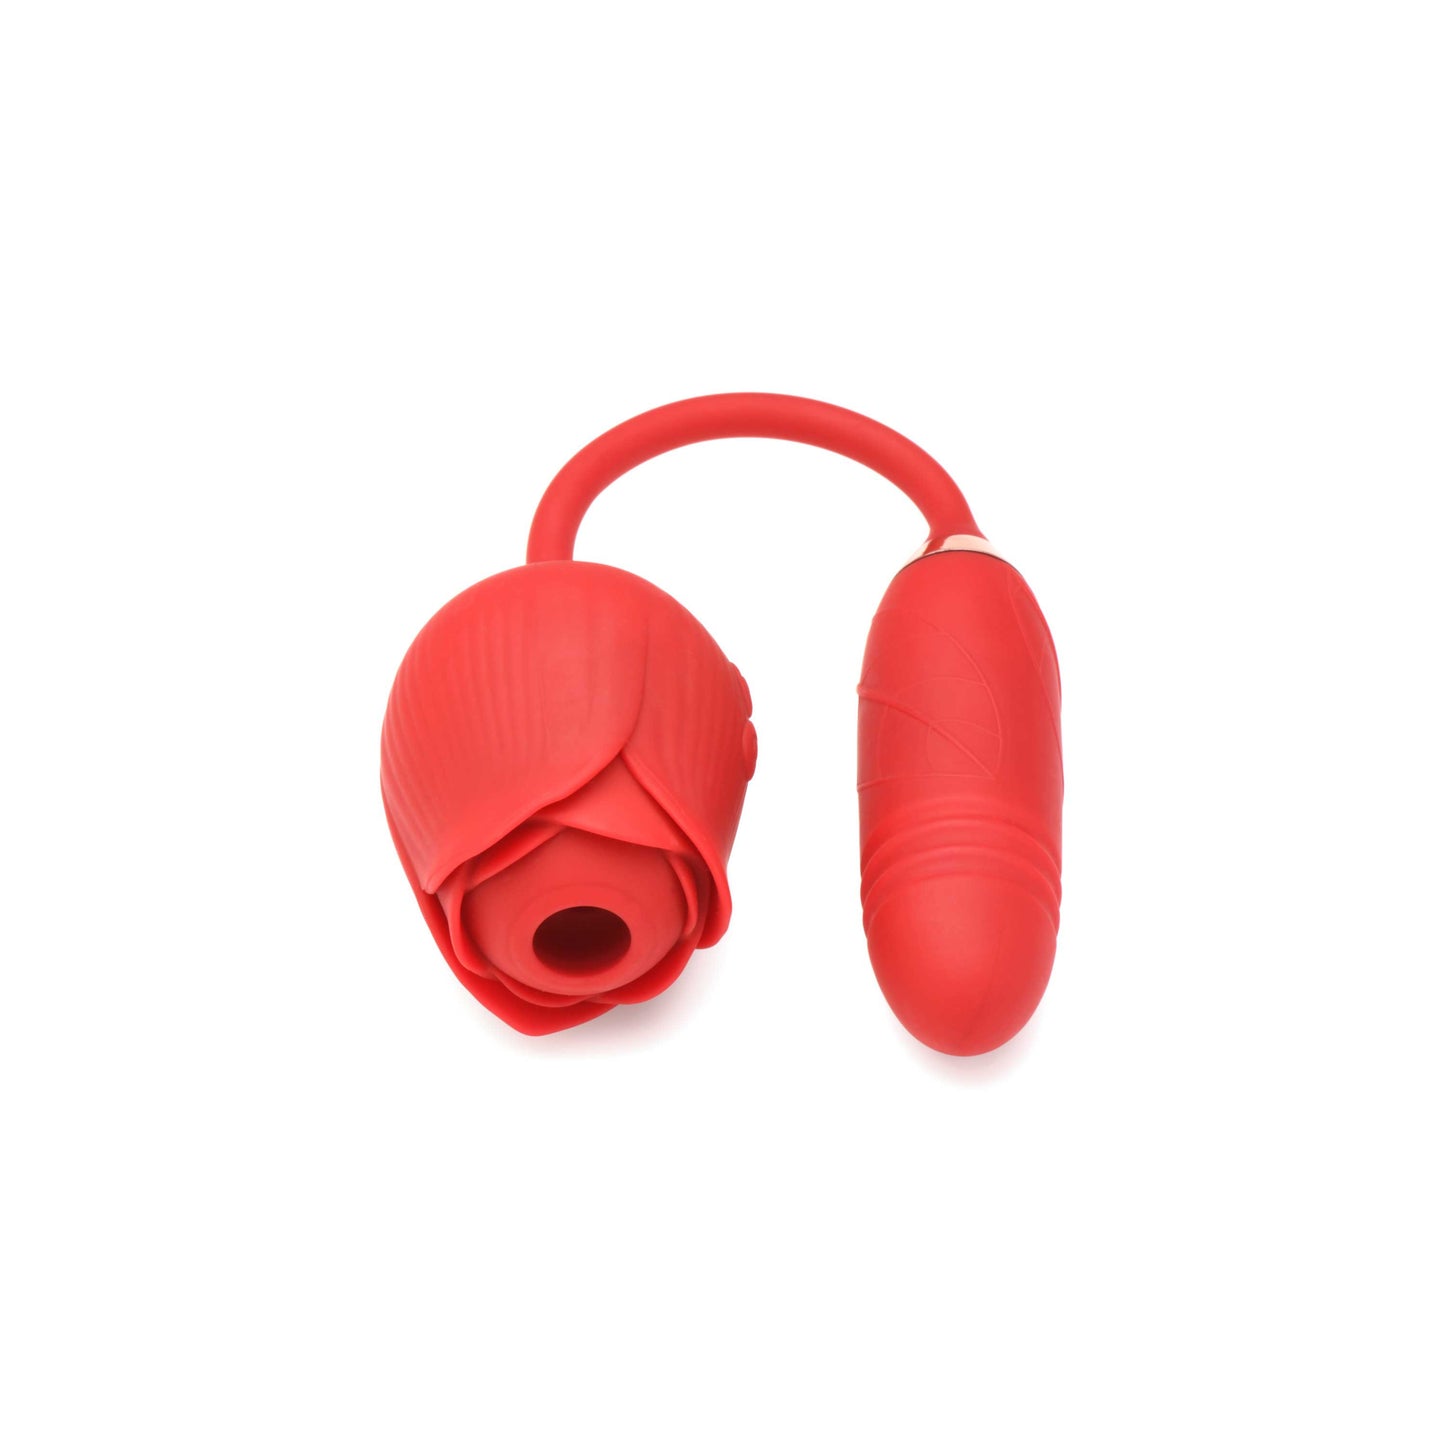 Bloomgasm Romping Rose Suction and Thrusting  Vibrator - Red